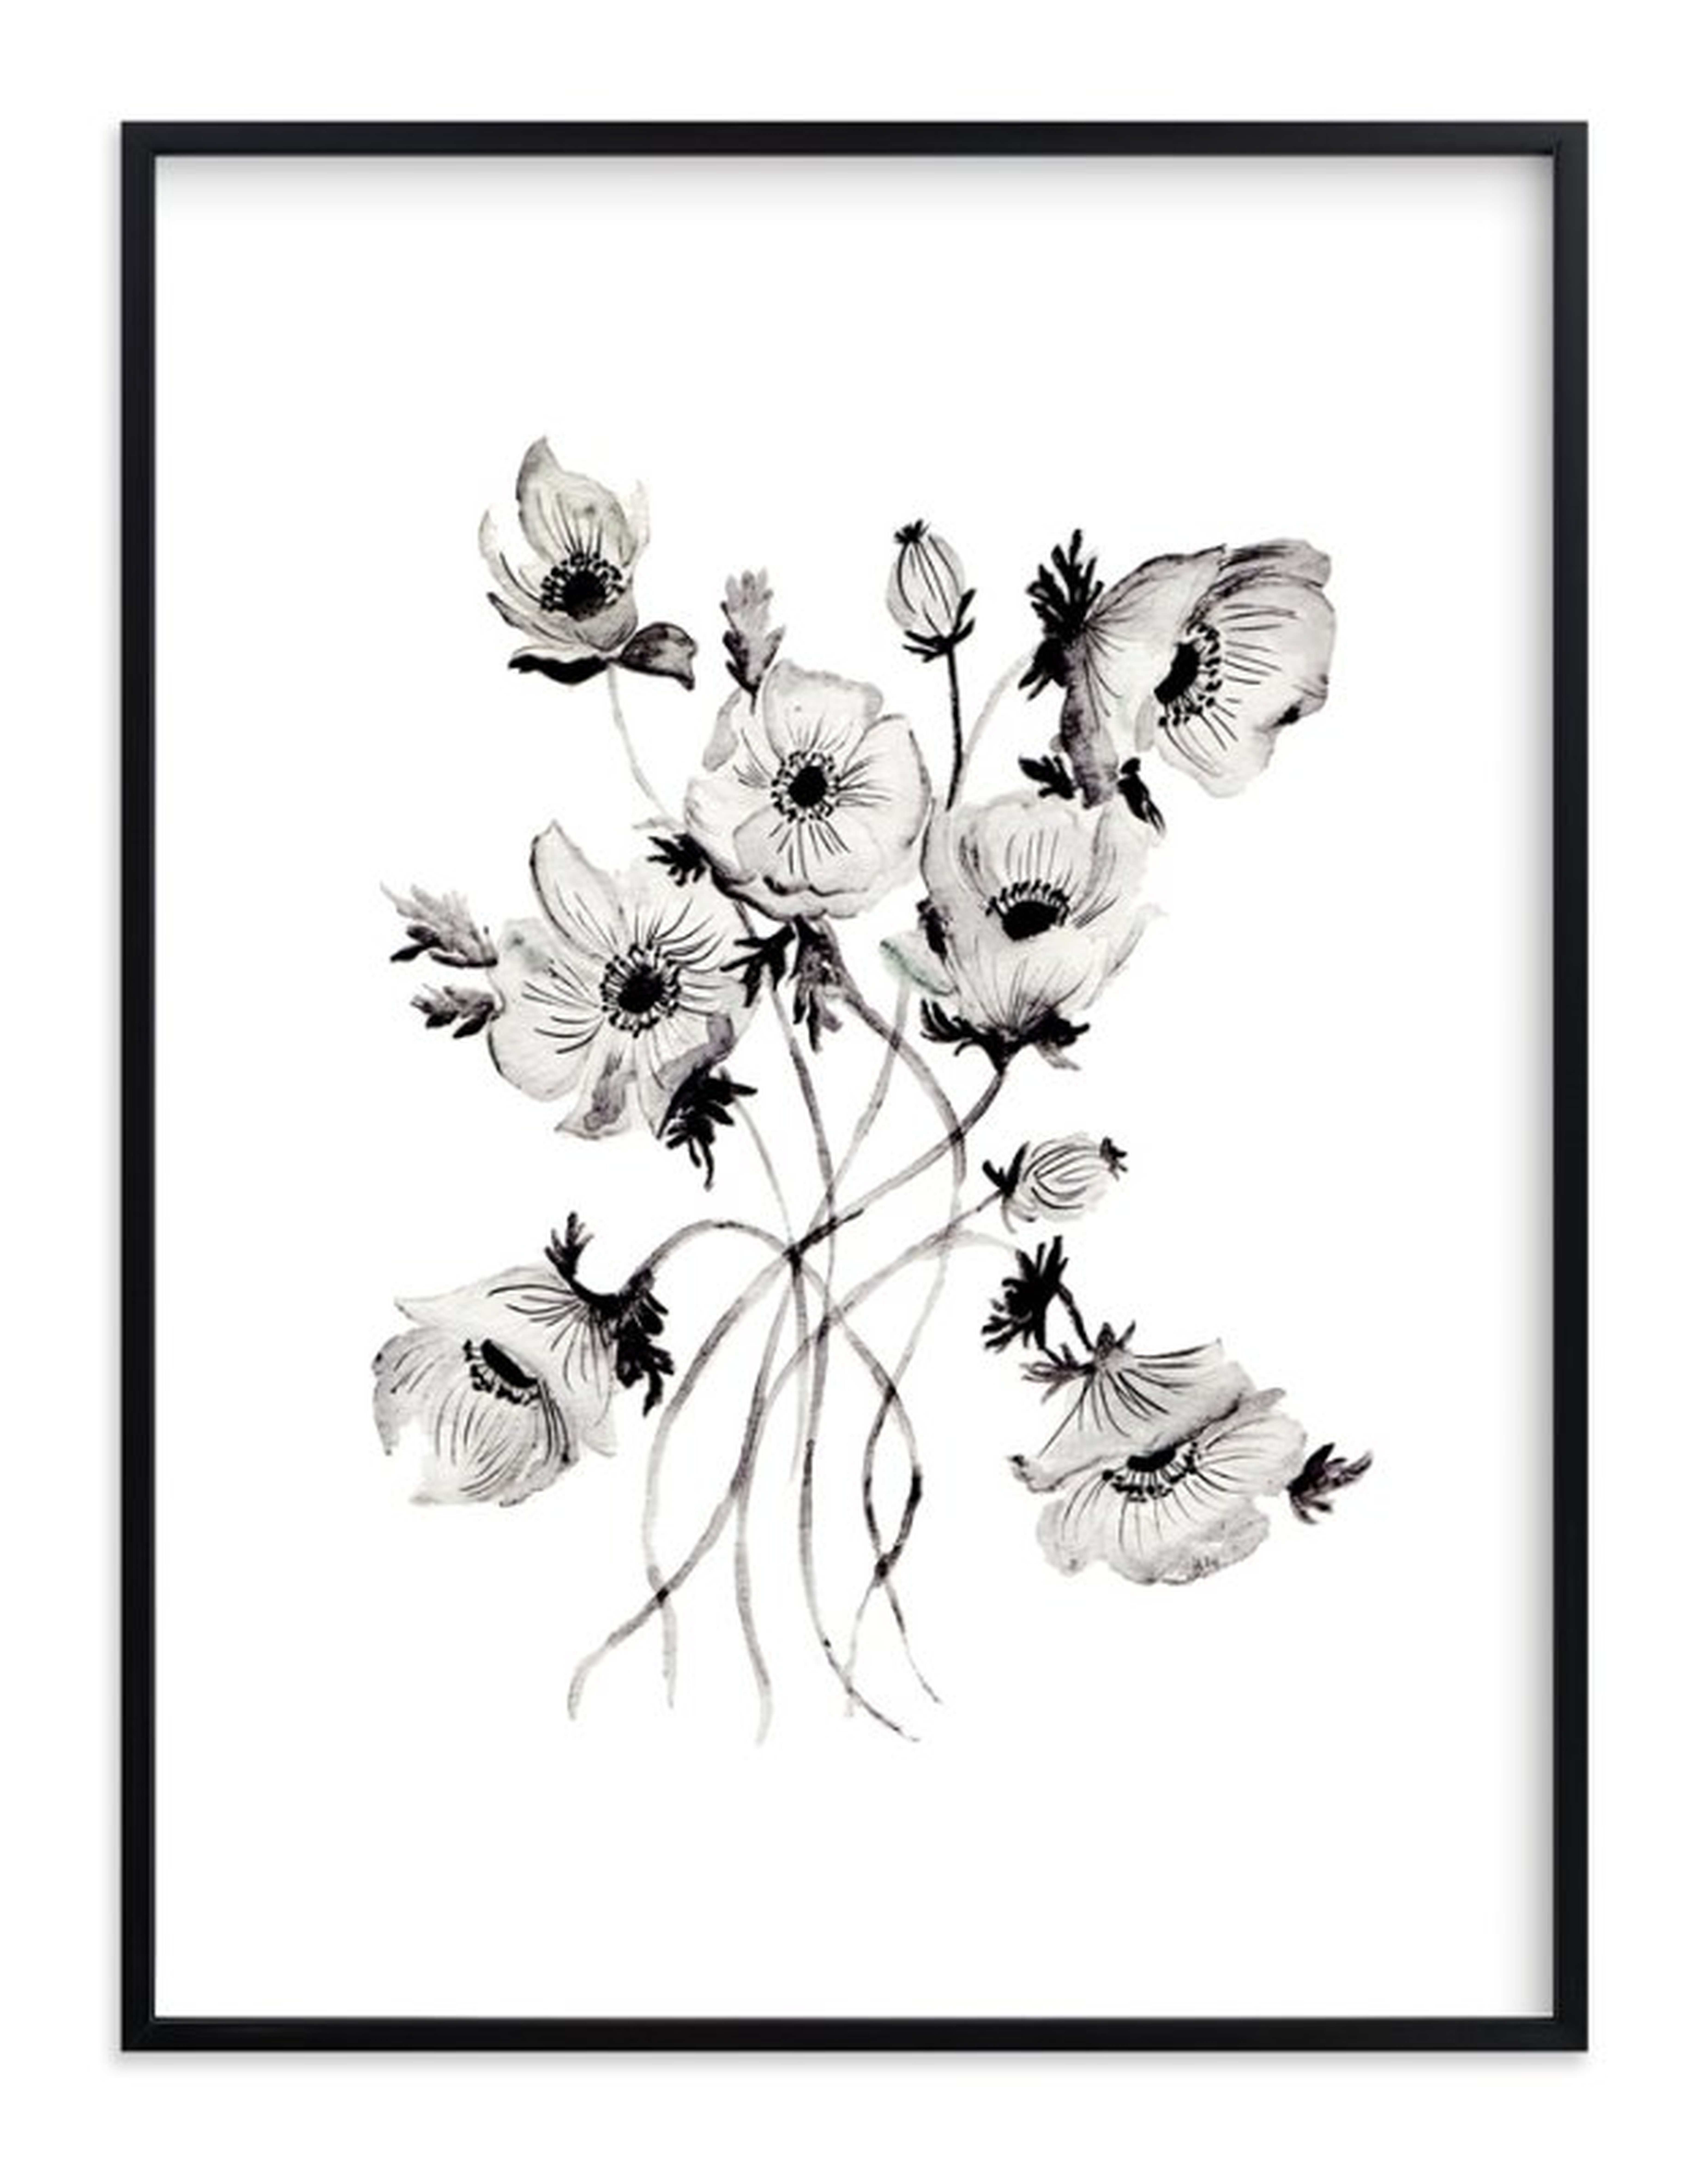 Greyscale Poppies Limited Edition Art Print - Minted